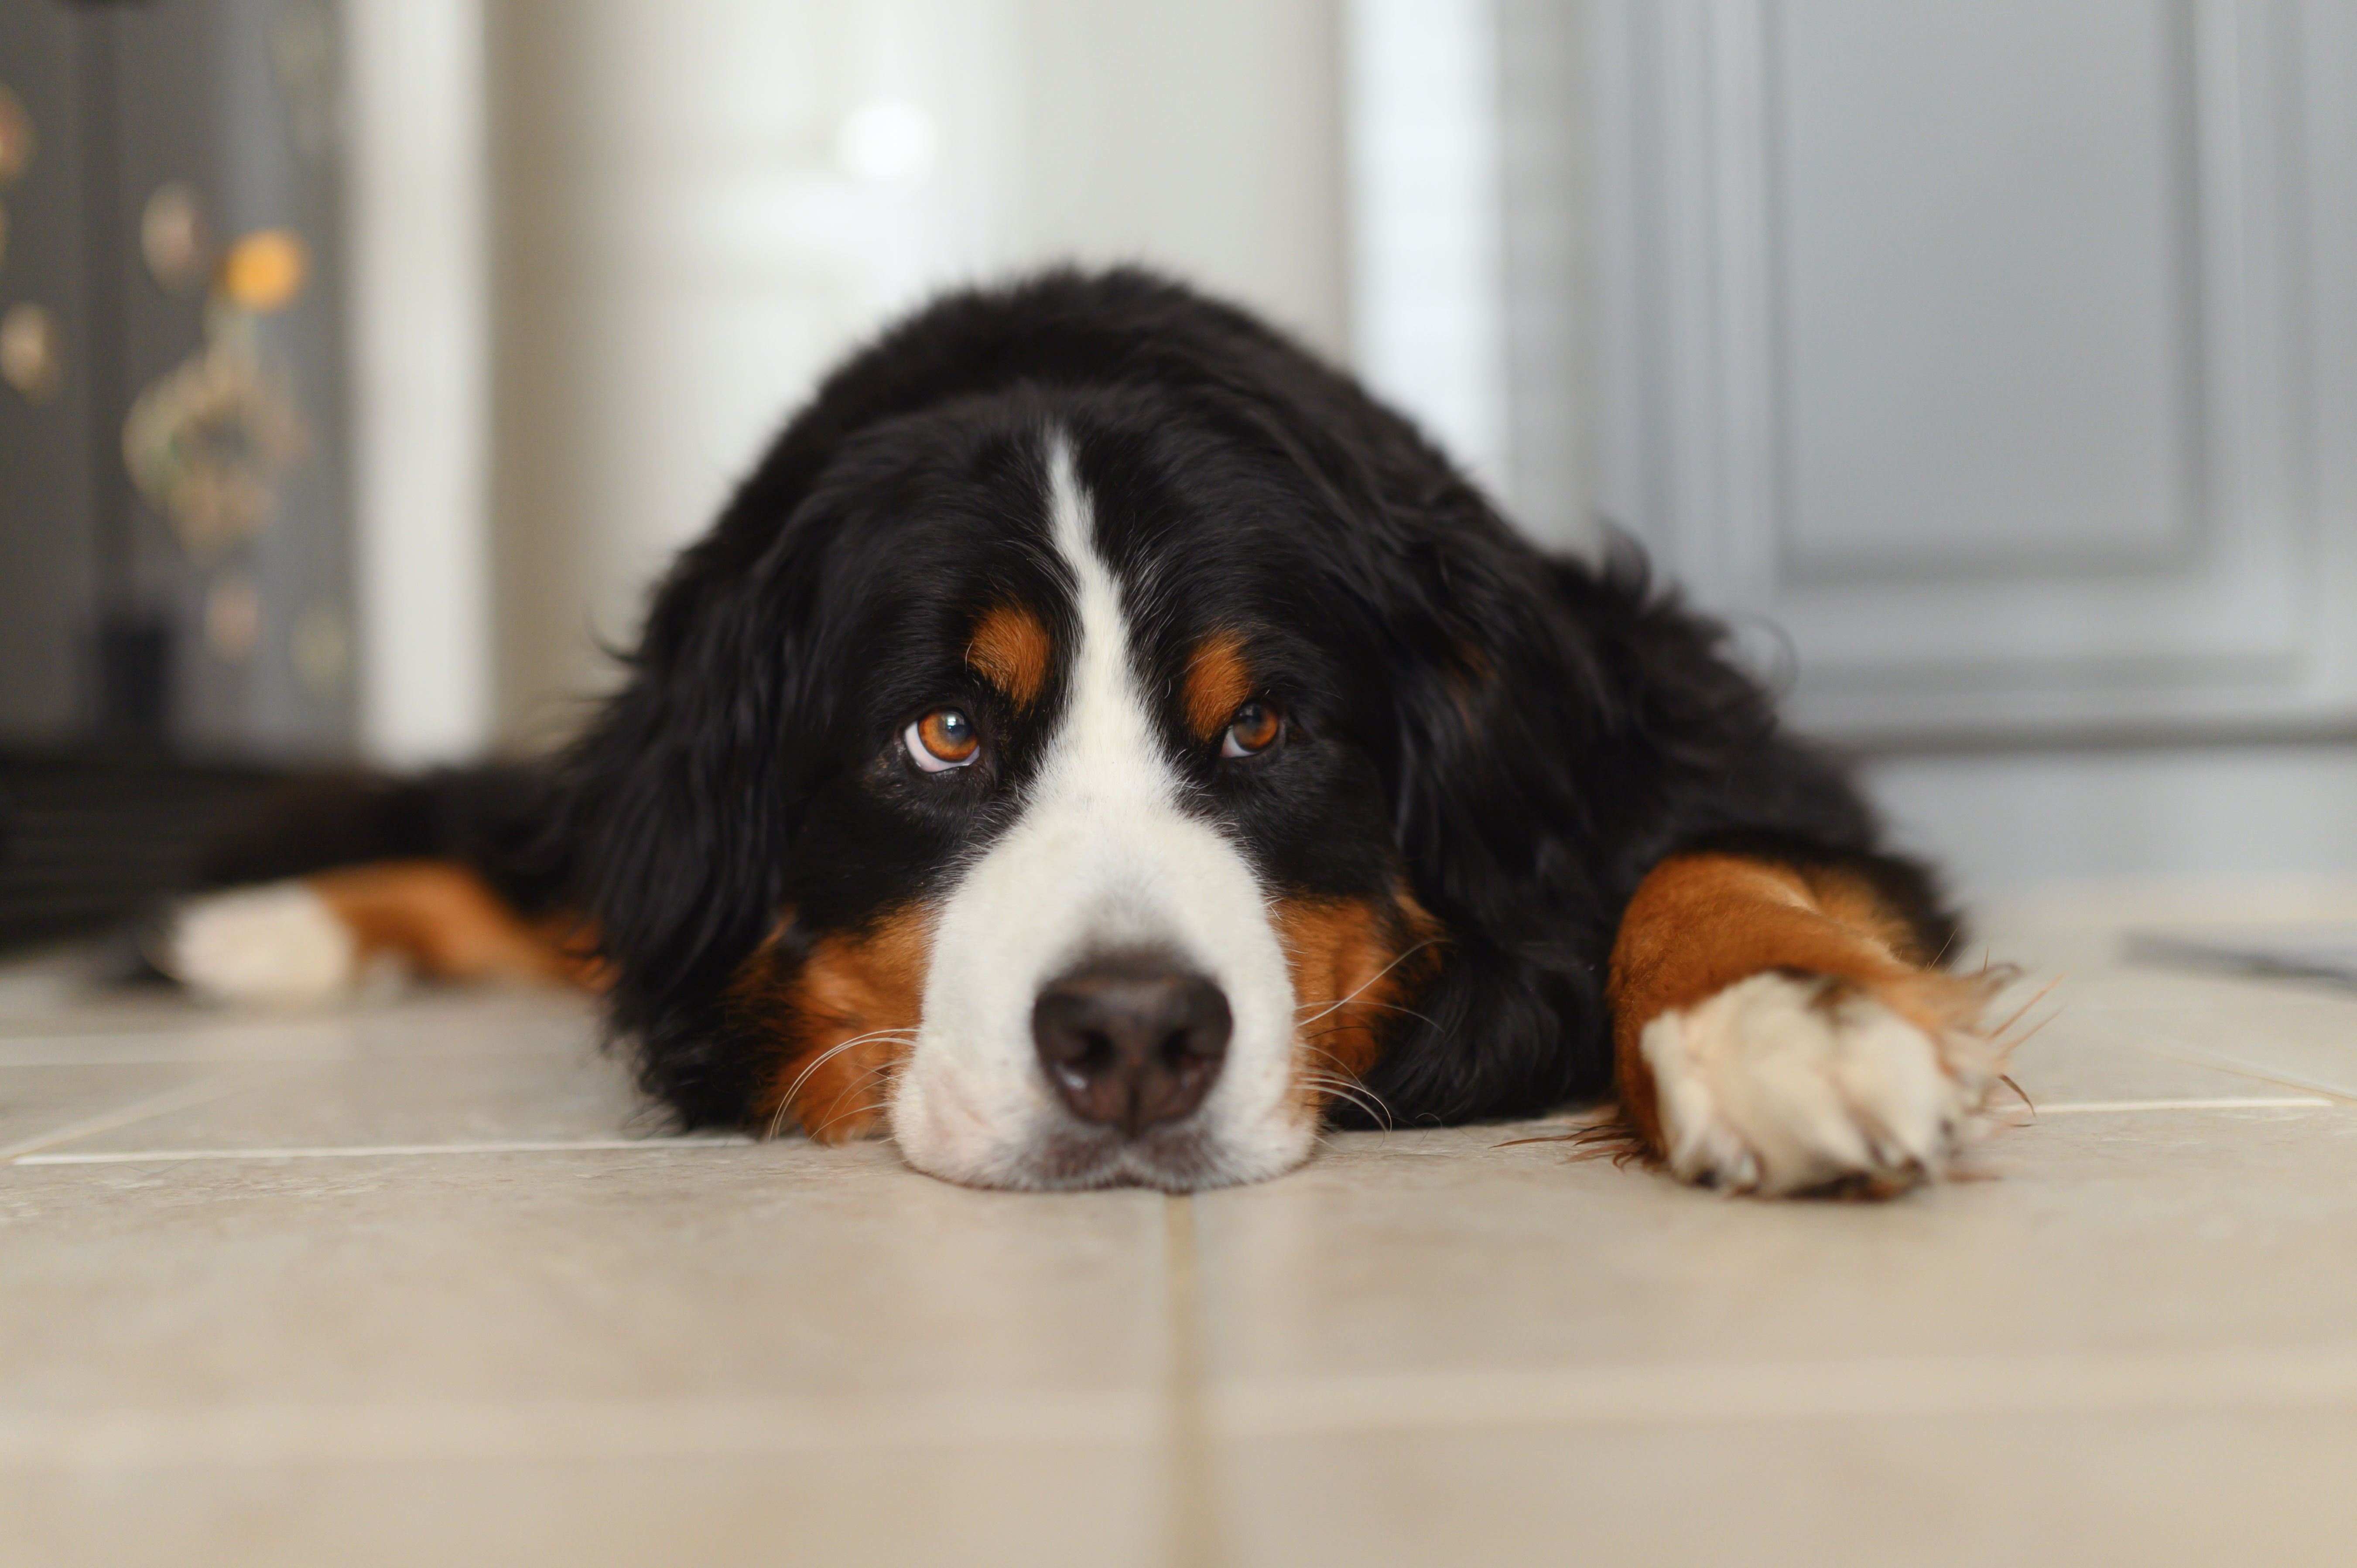 Birdie - the Bernese Mountain Dog - hangs out in her house waiting to go for a walk.